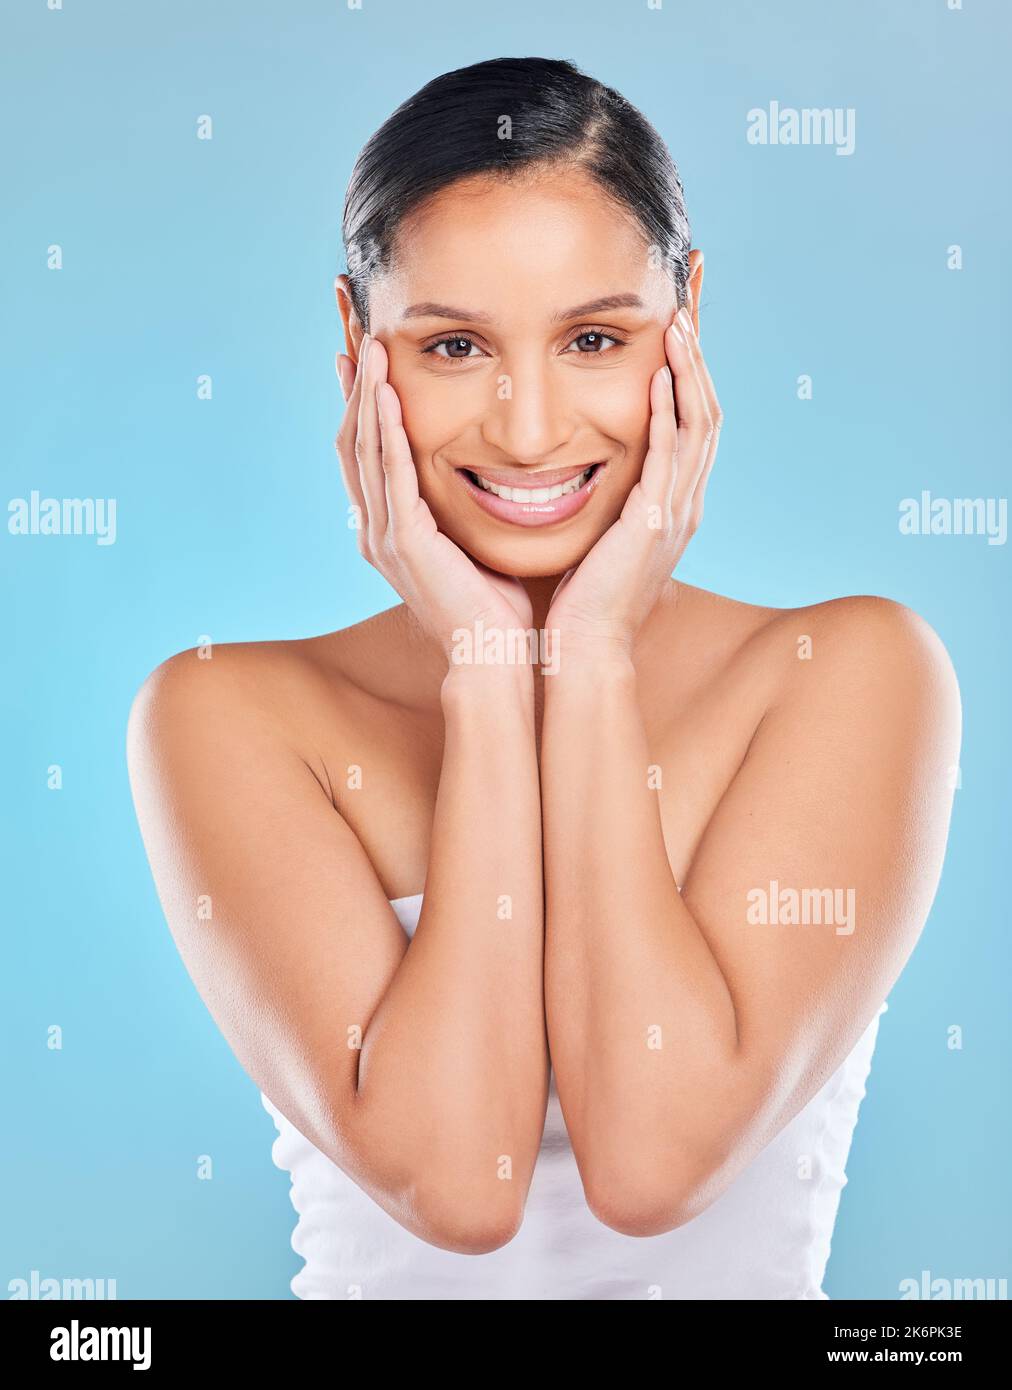 My skin is the softest its ever been. Studio portrait of an attractive young woman posing against a blue background. Stock Photo